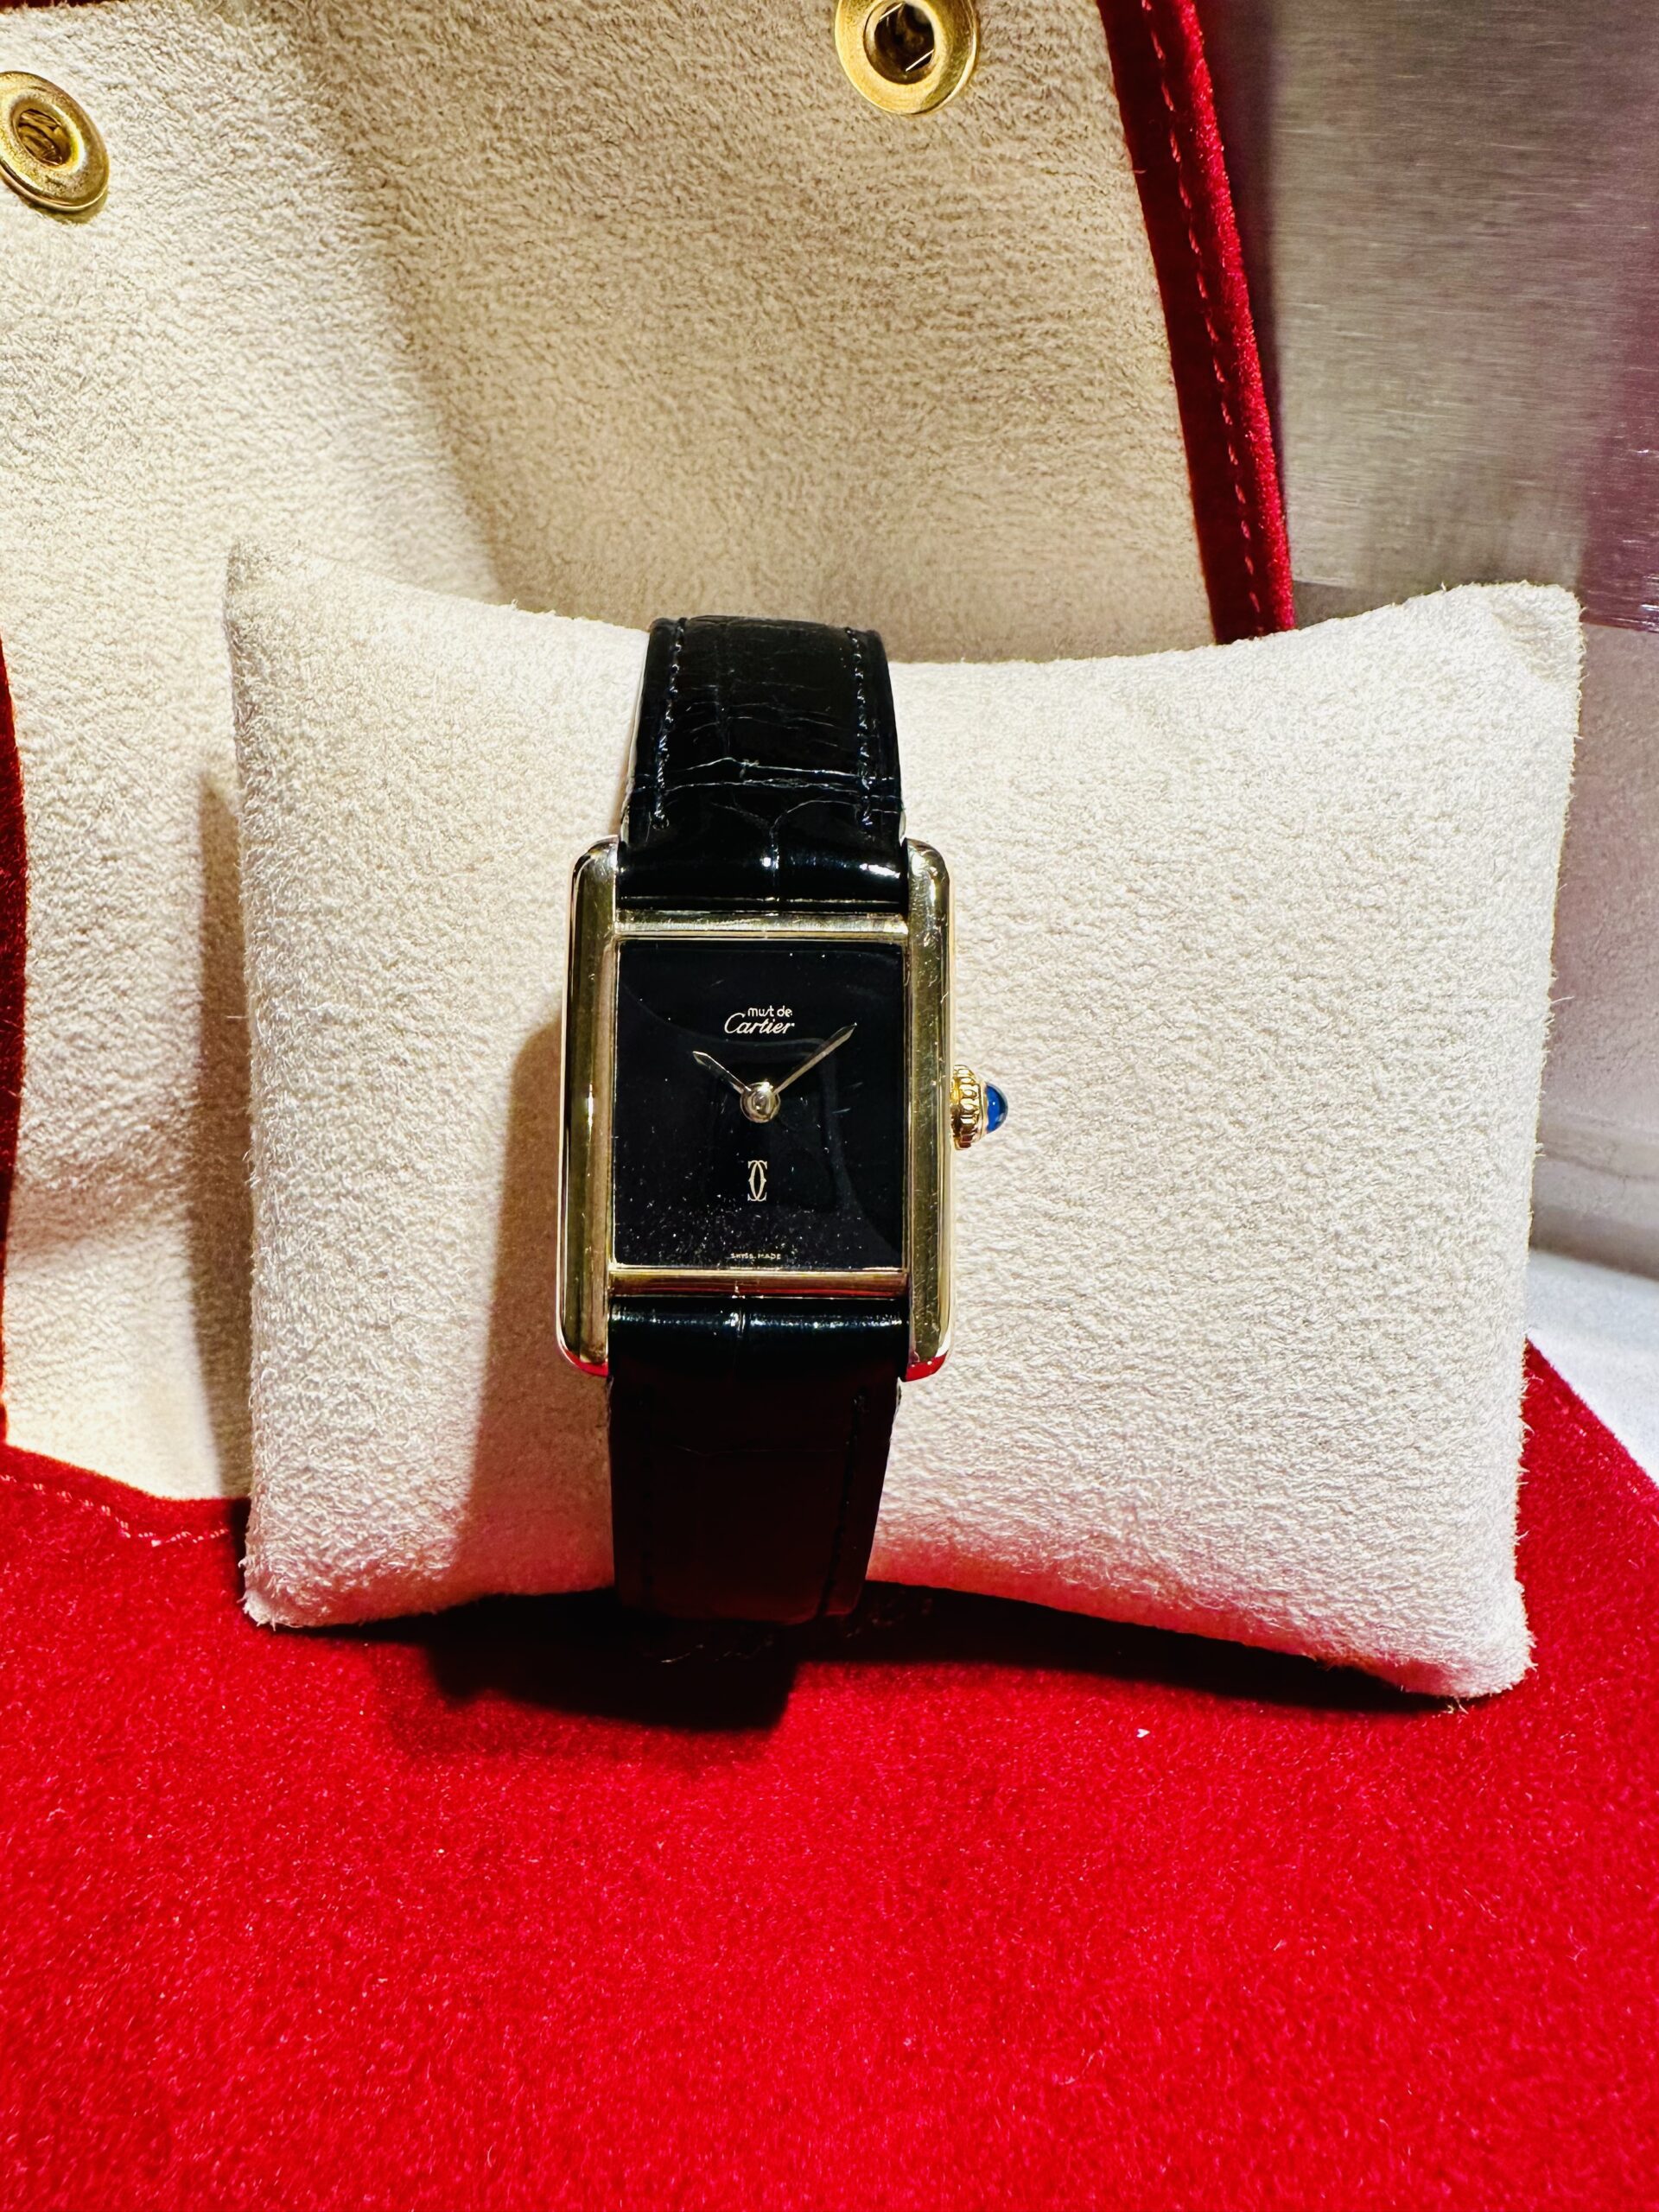 Vintage Cartier Tank Le must watch after restoration | Ode2style.com